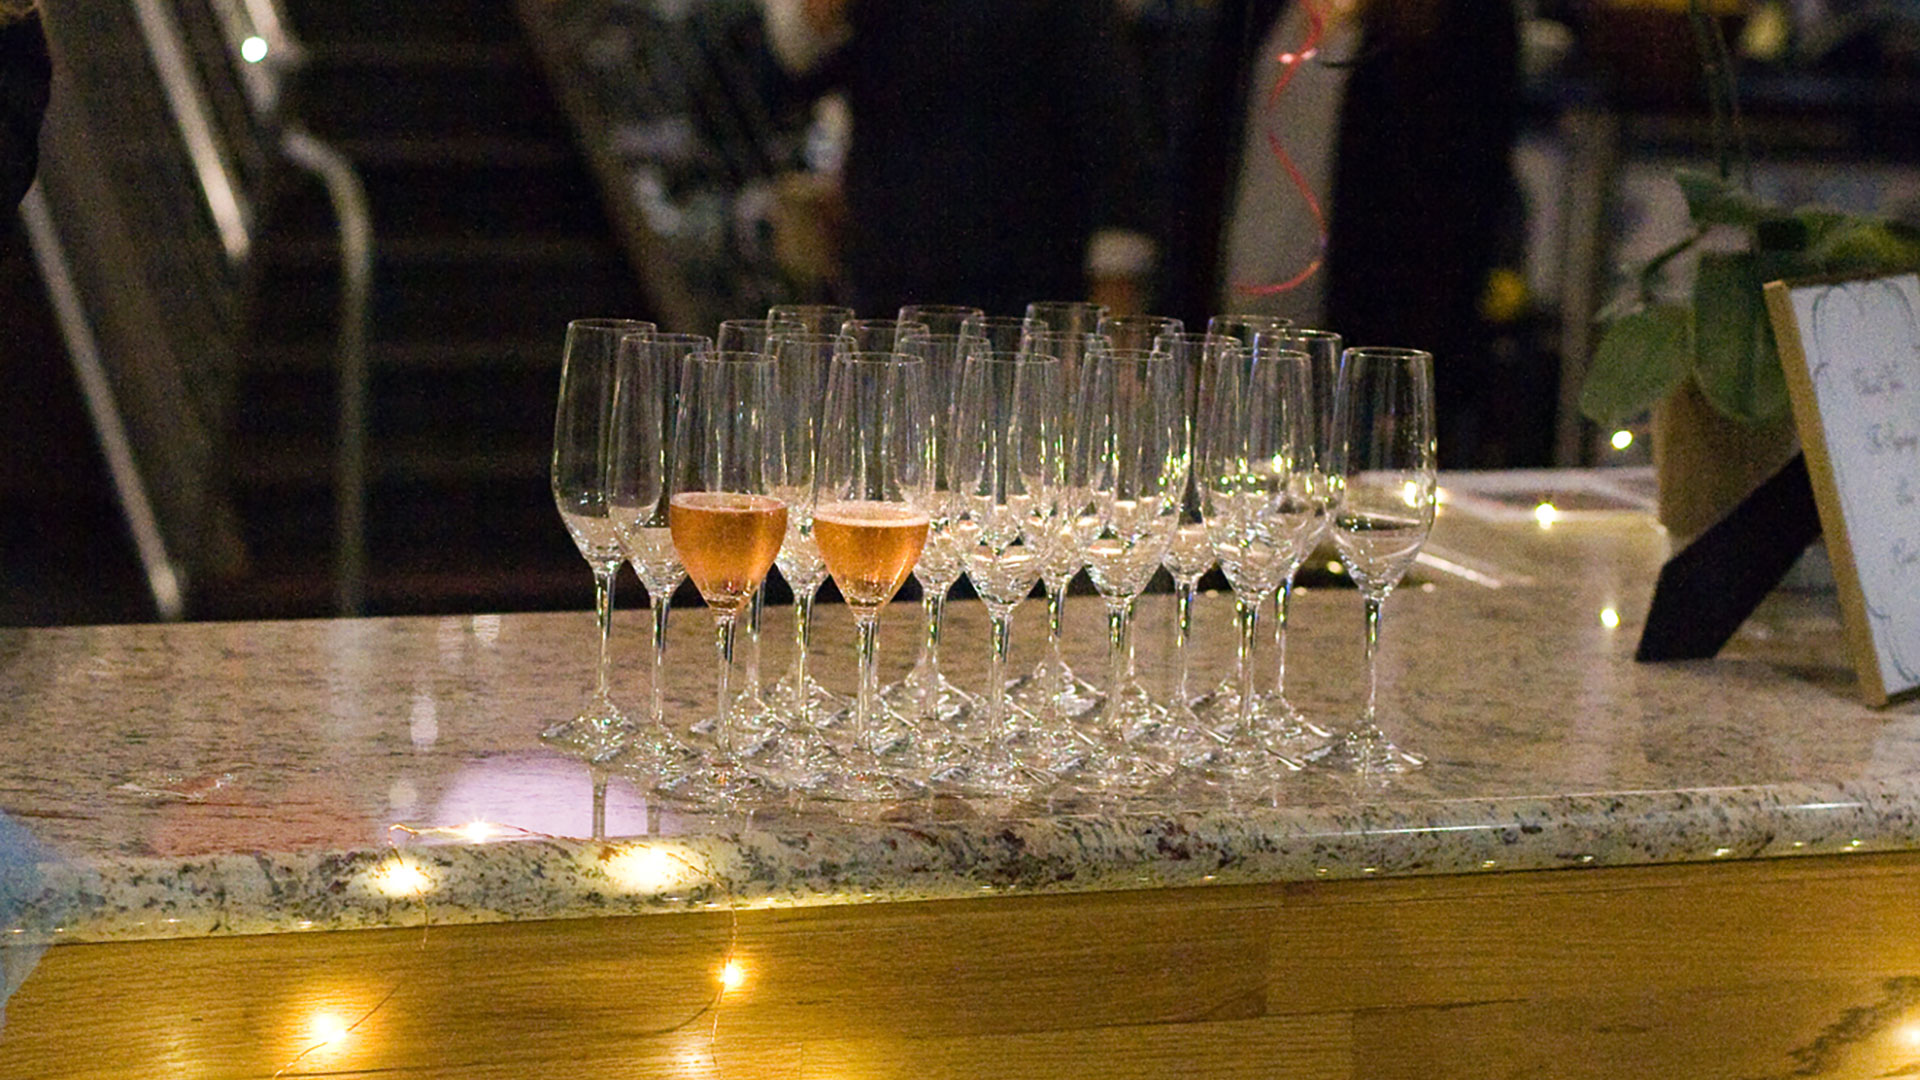 Group of champagne flutes on countertop, people gathering in background